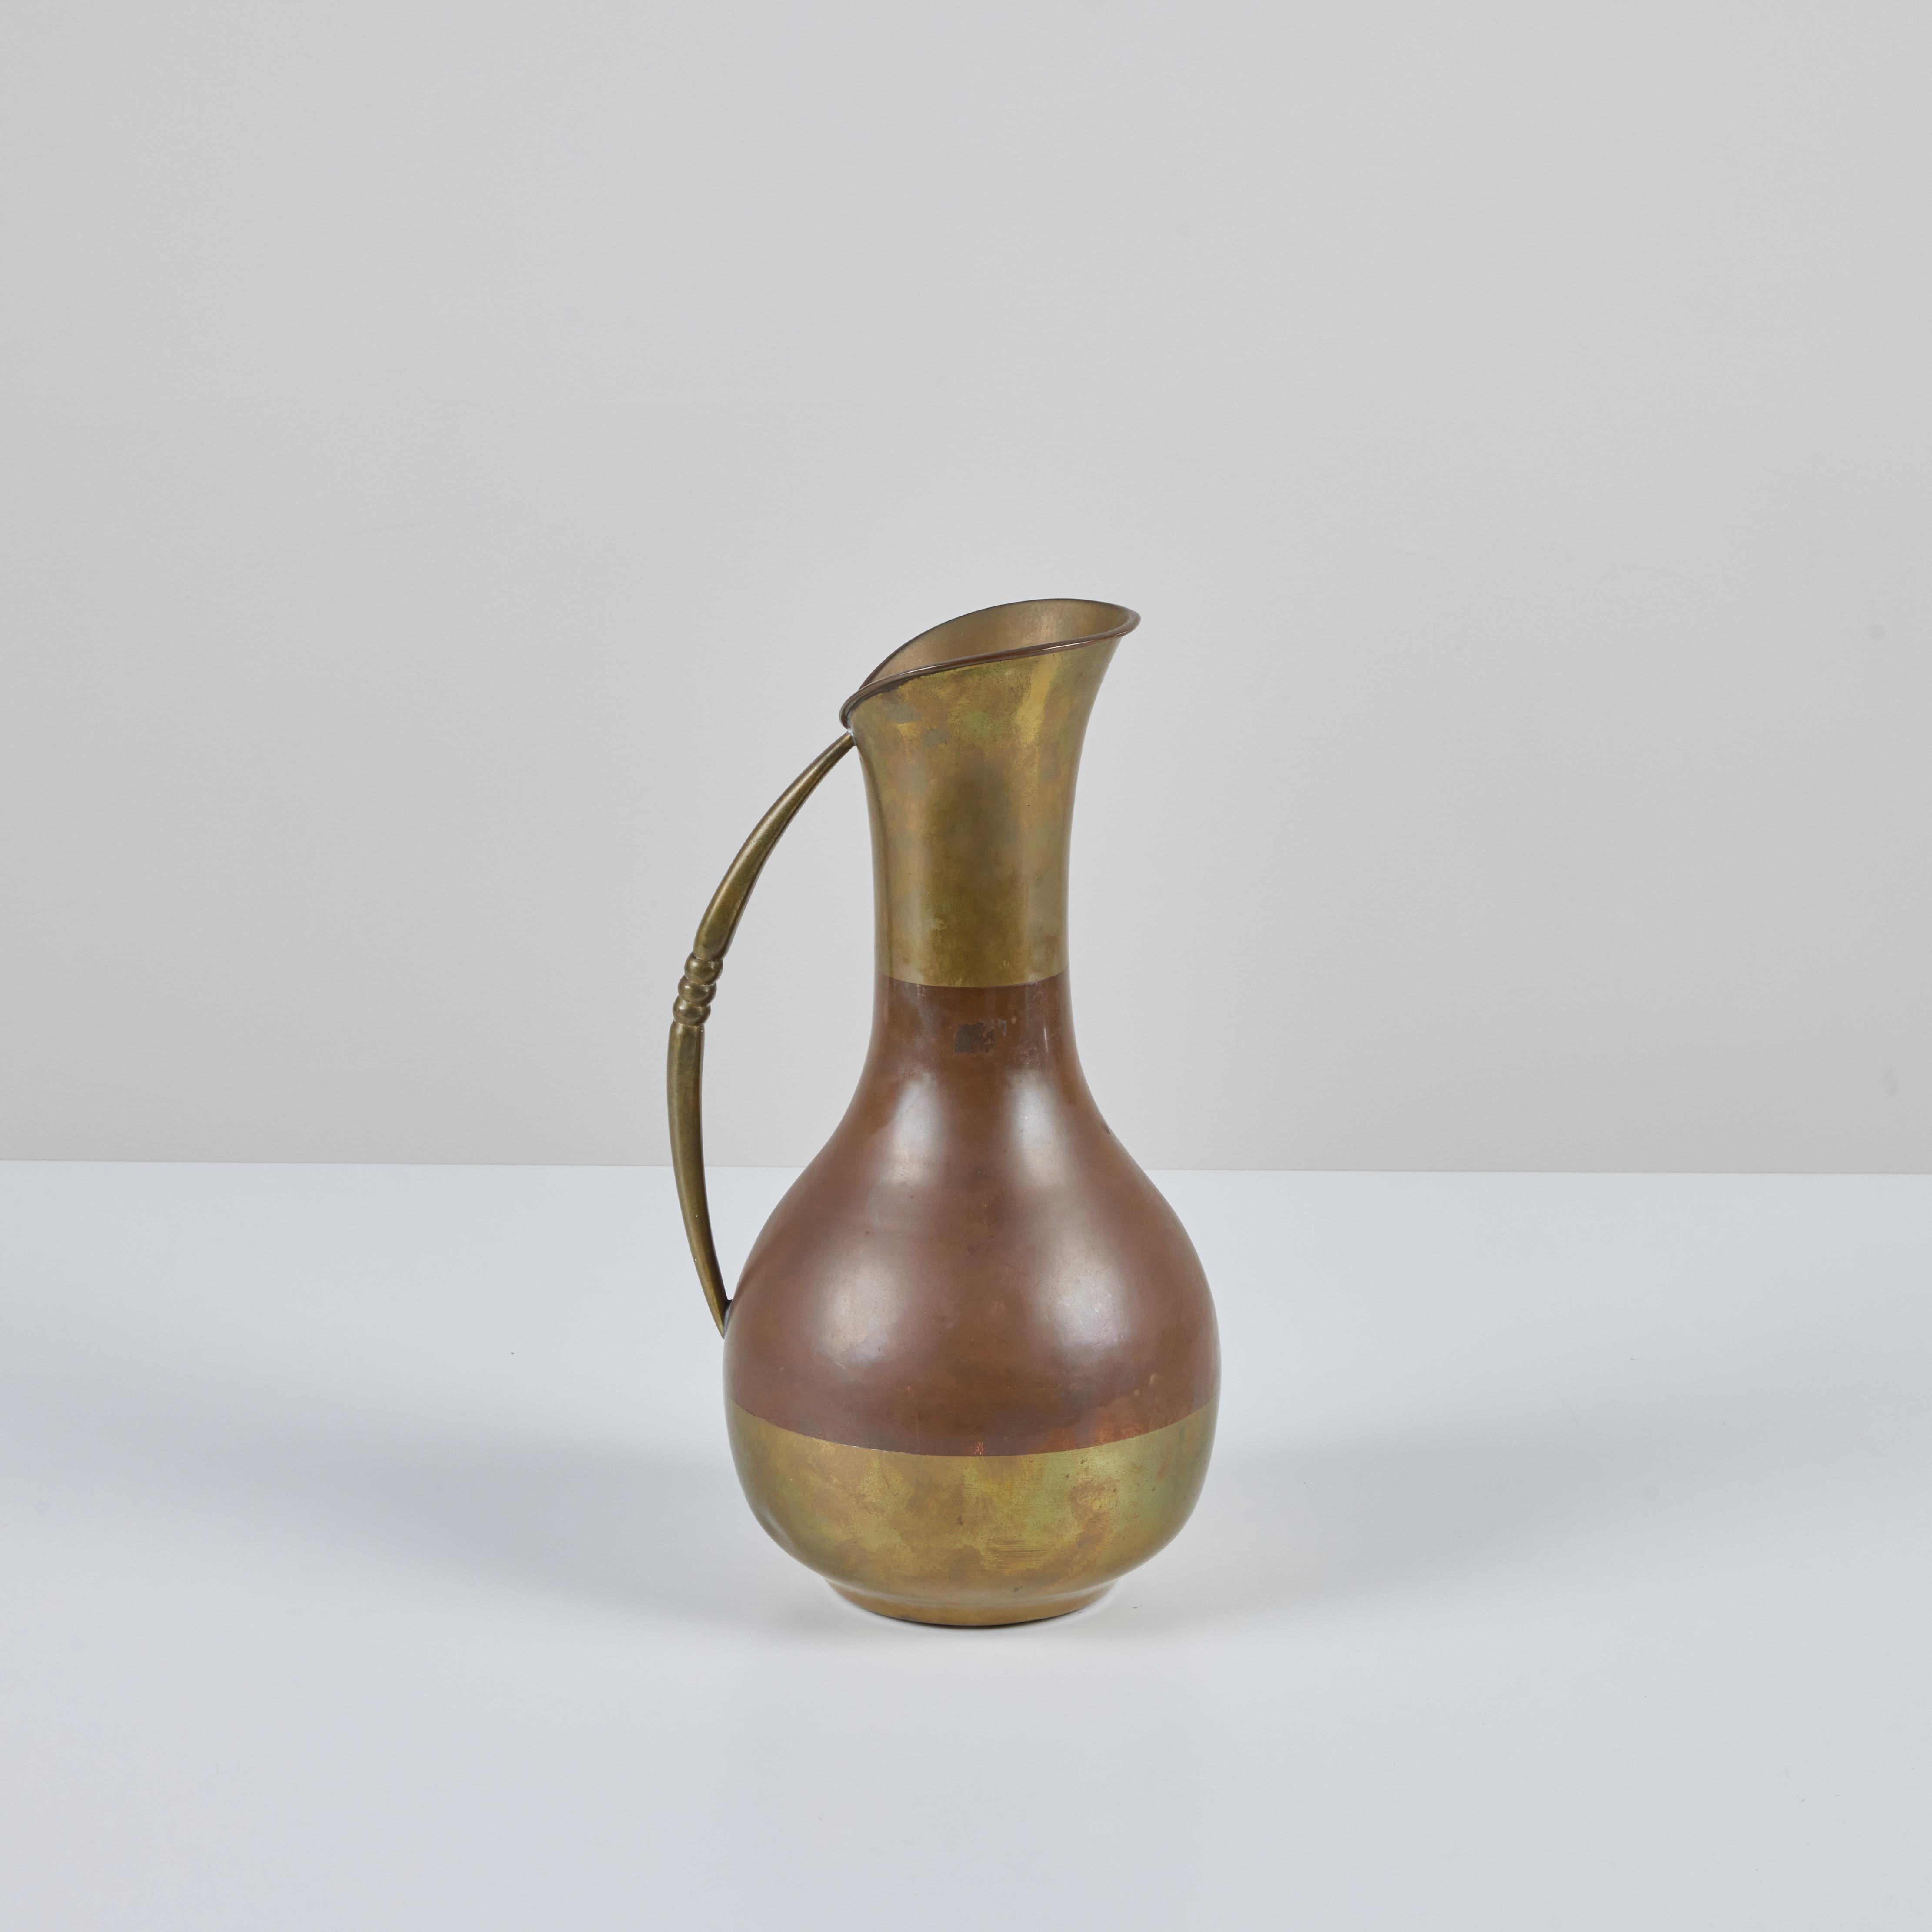 Brass and copper pitcher made in Mexico. The pitcher features a fluted opening with a copper middle section and brass top, bottom and handle. The handle has a simplistic three ribbed detail.
Stamped 